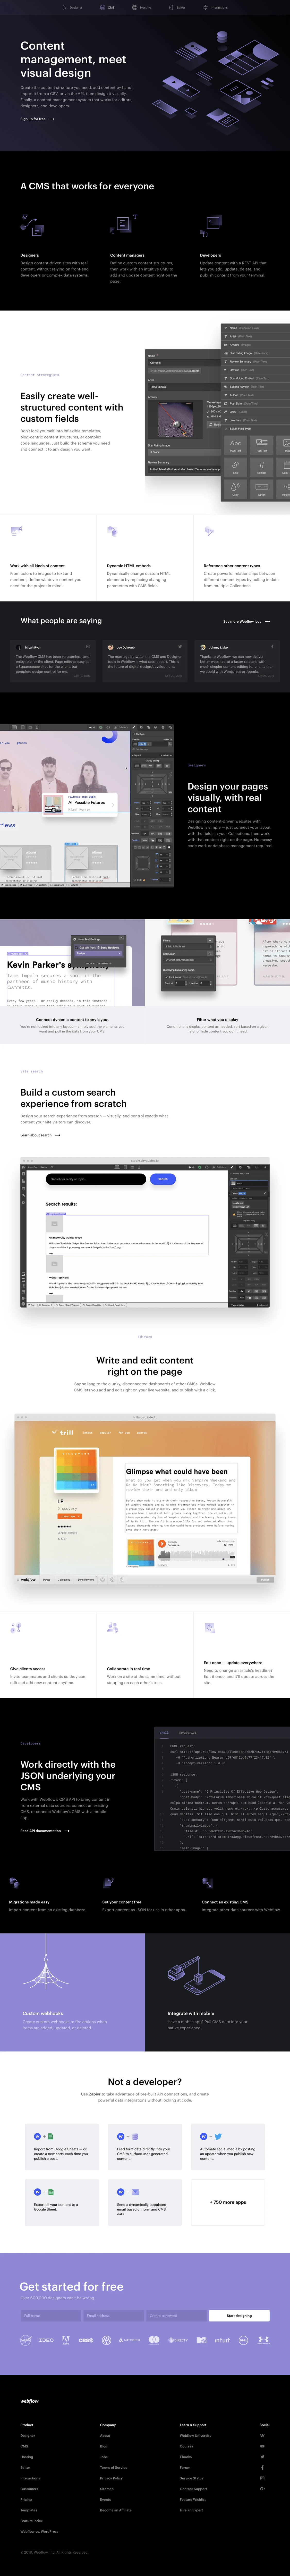 Webflow Landing Page Example: Build and manage powerful, professional websites — without writing code or managing databases. Add and edit content with a simple, on-page WYSIWIG editor.